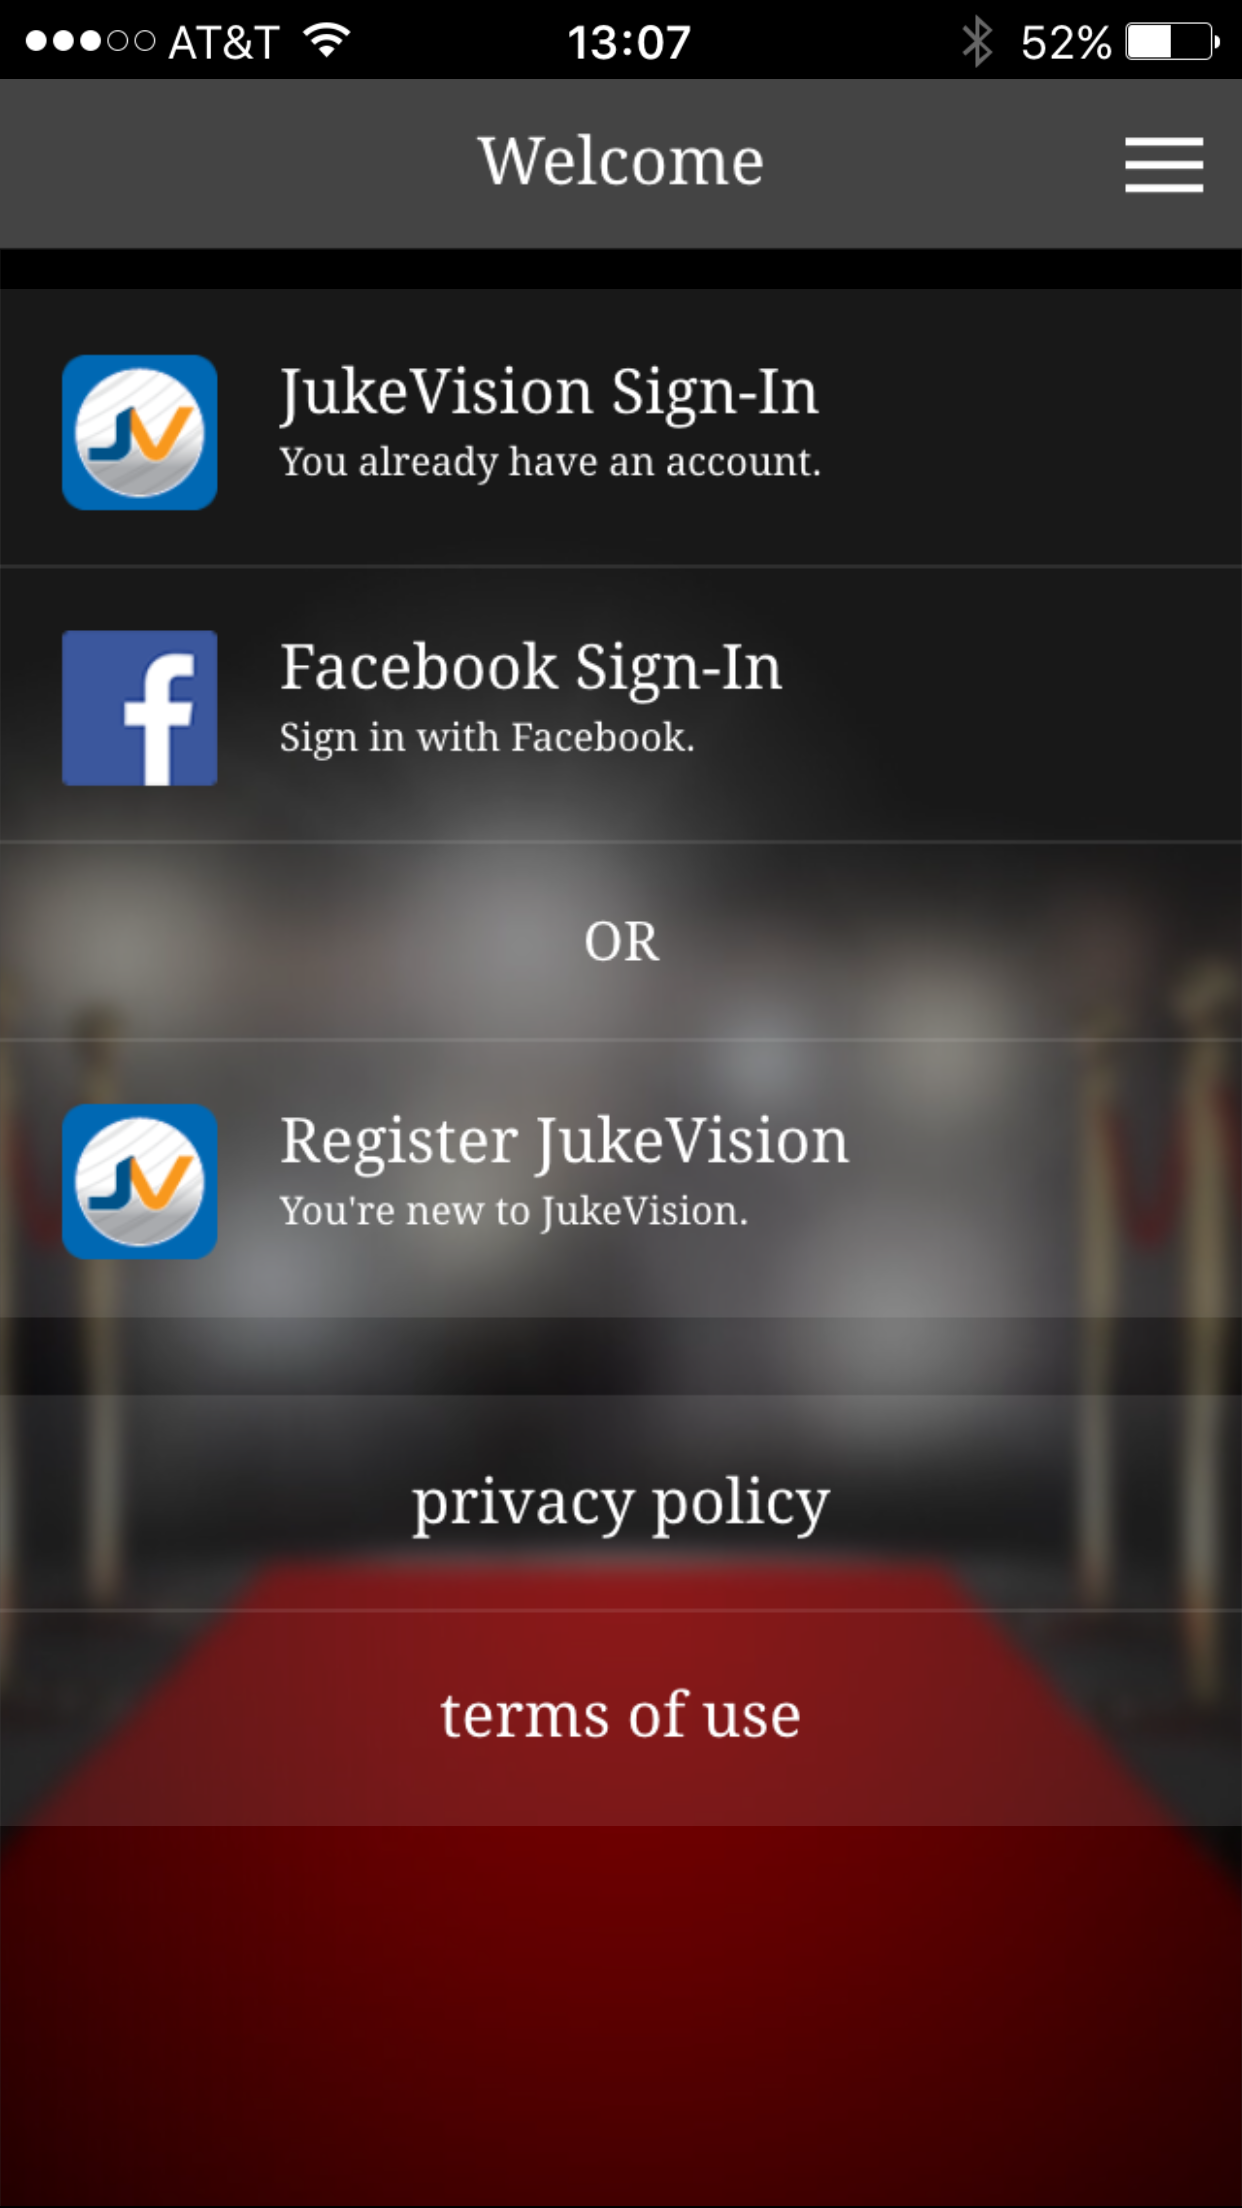 JukeVision App - Home Screen